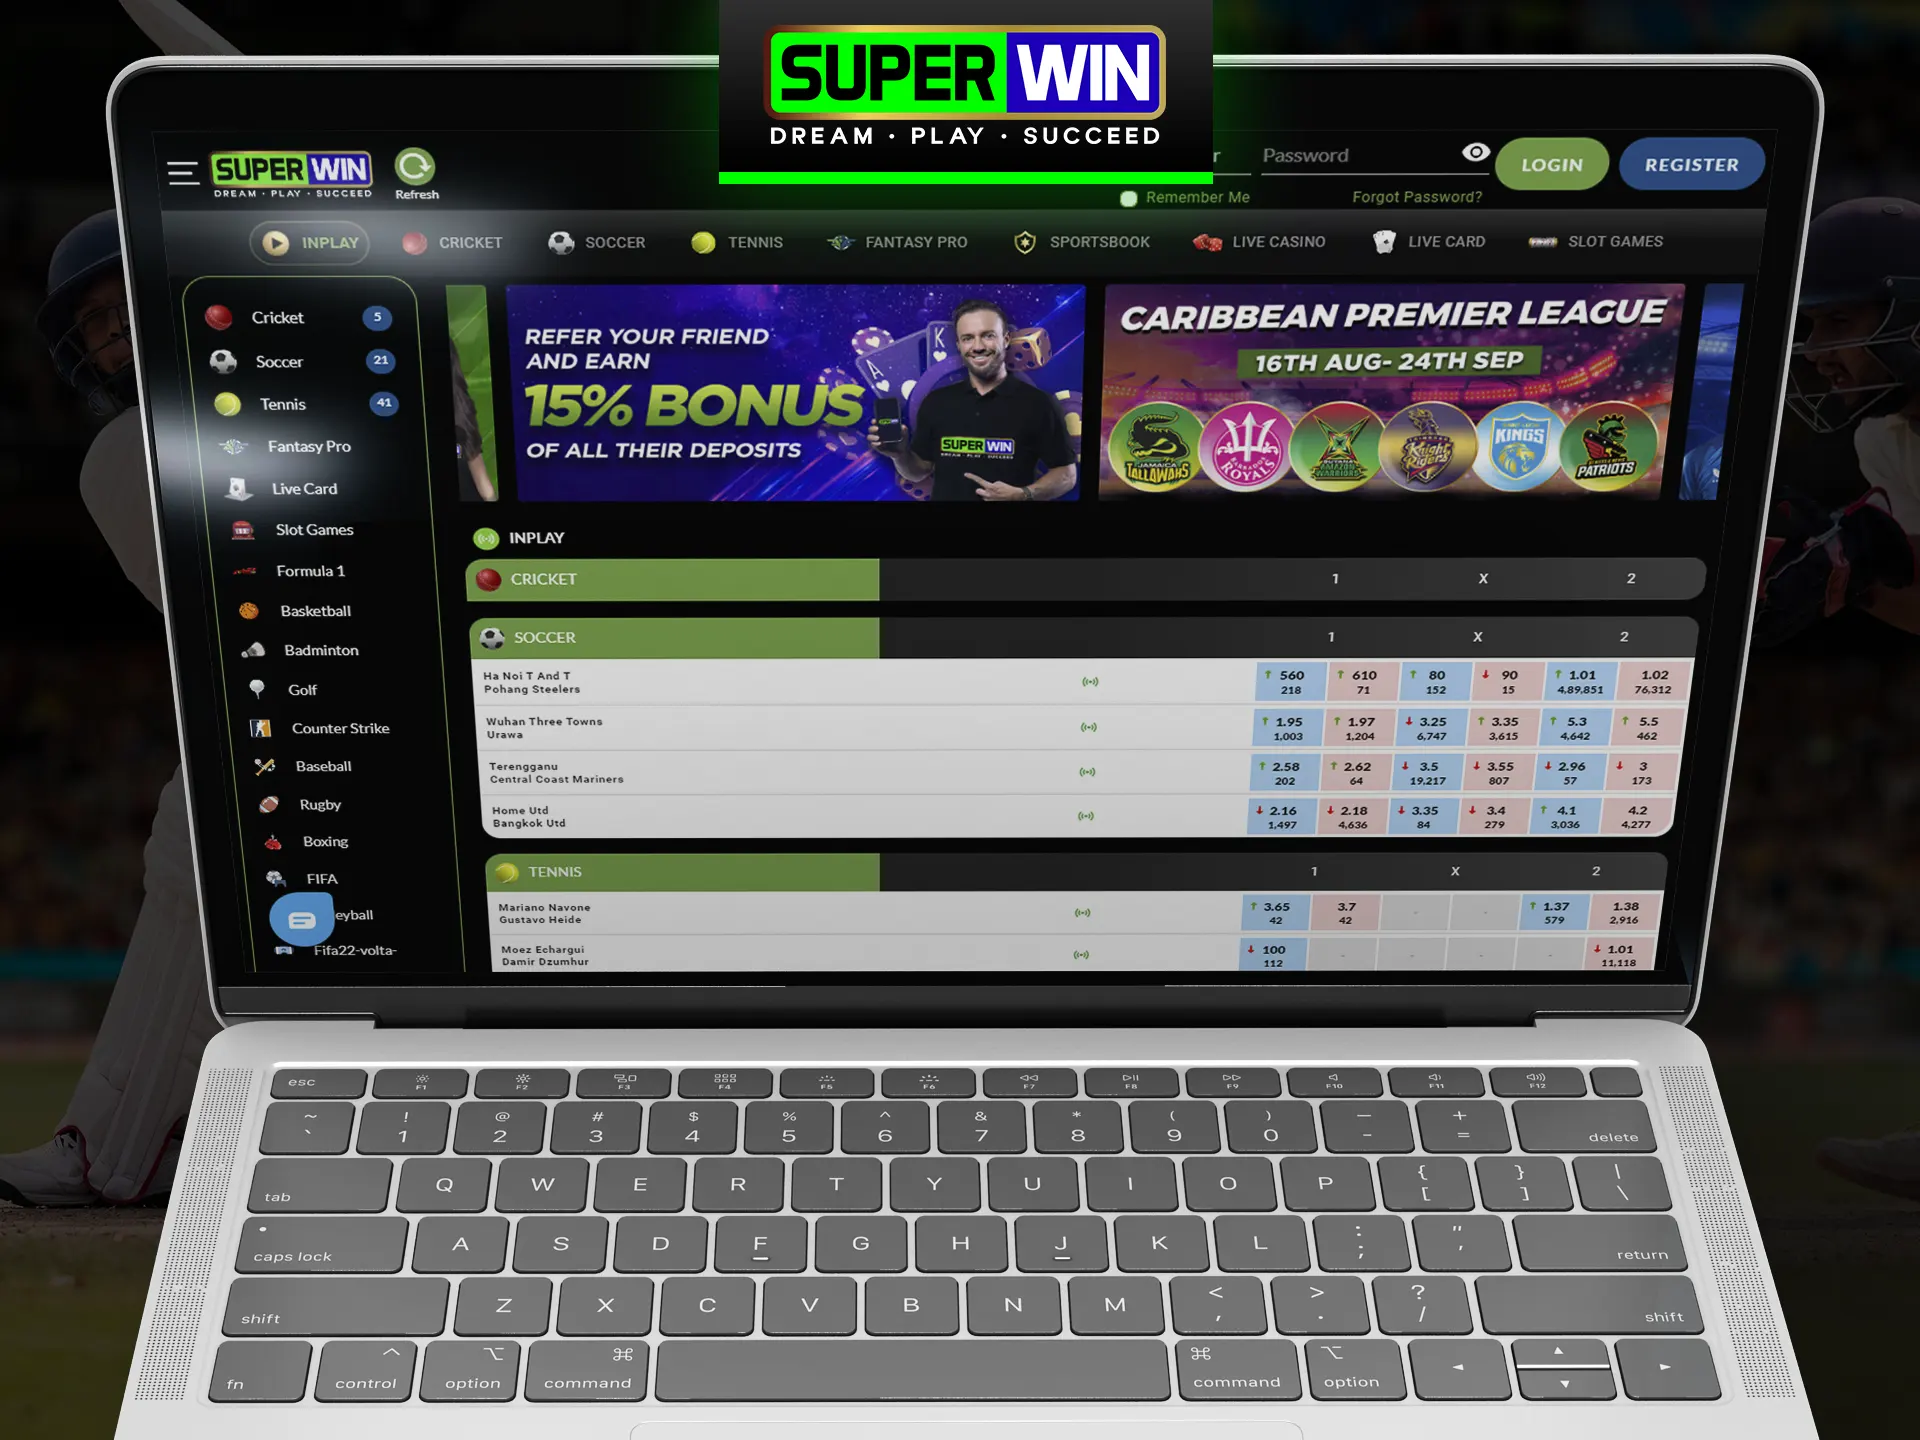 Be sure to check out the official Superwin website.